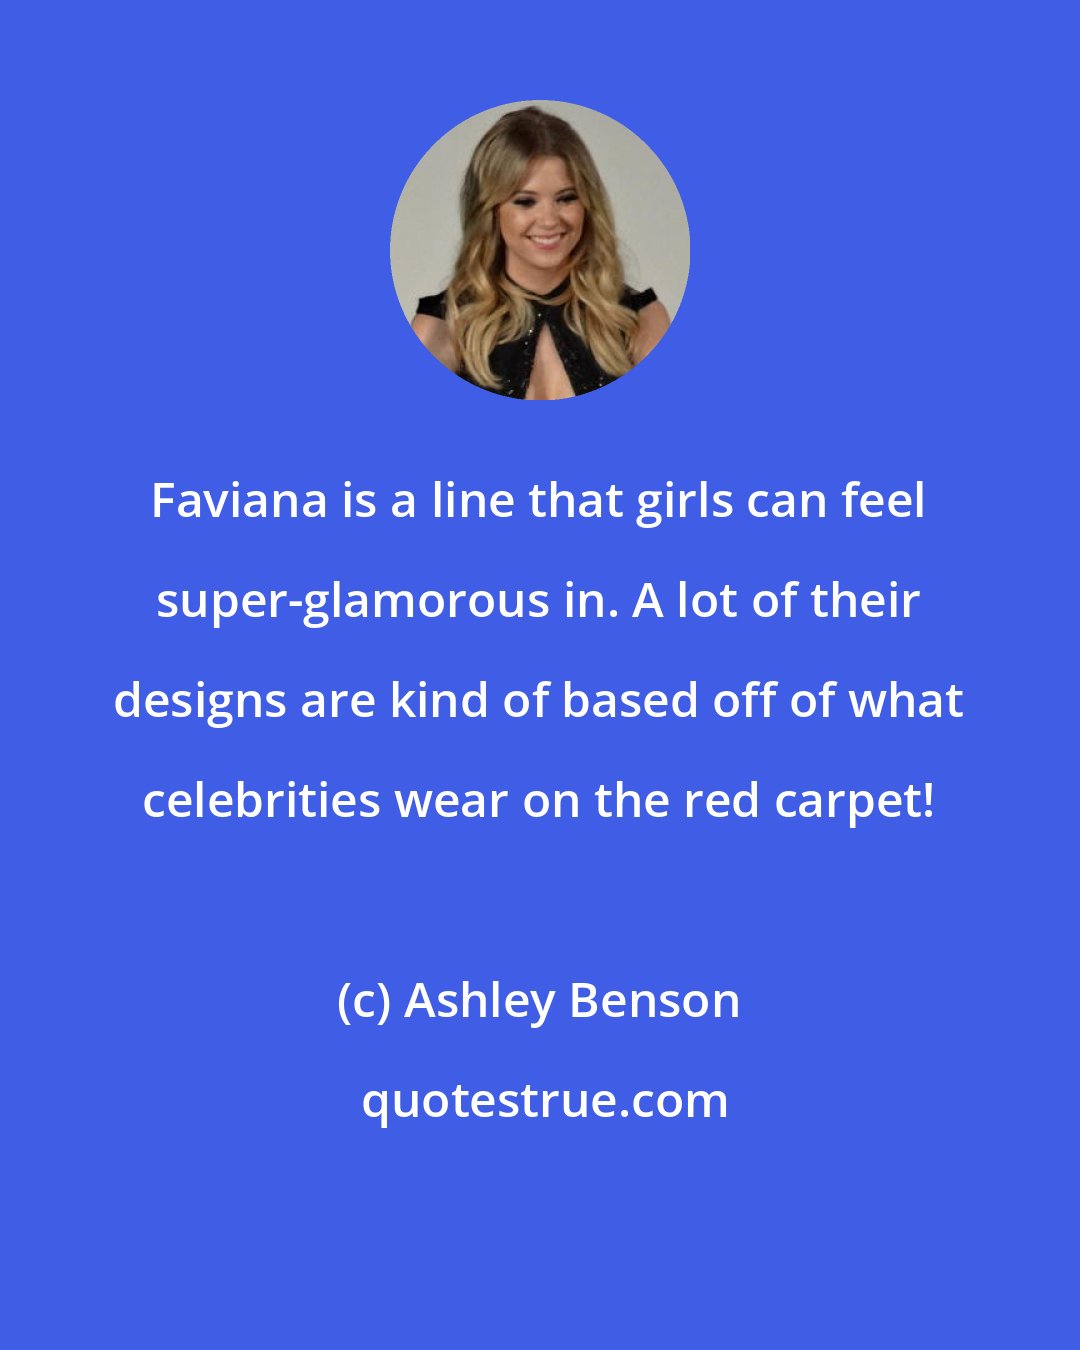 Ashley Benson: Faviana is a line that girls can feel super-glamorous in. A lot of their designs are kind of based off of what celebrities wear on the red carpet!